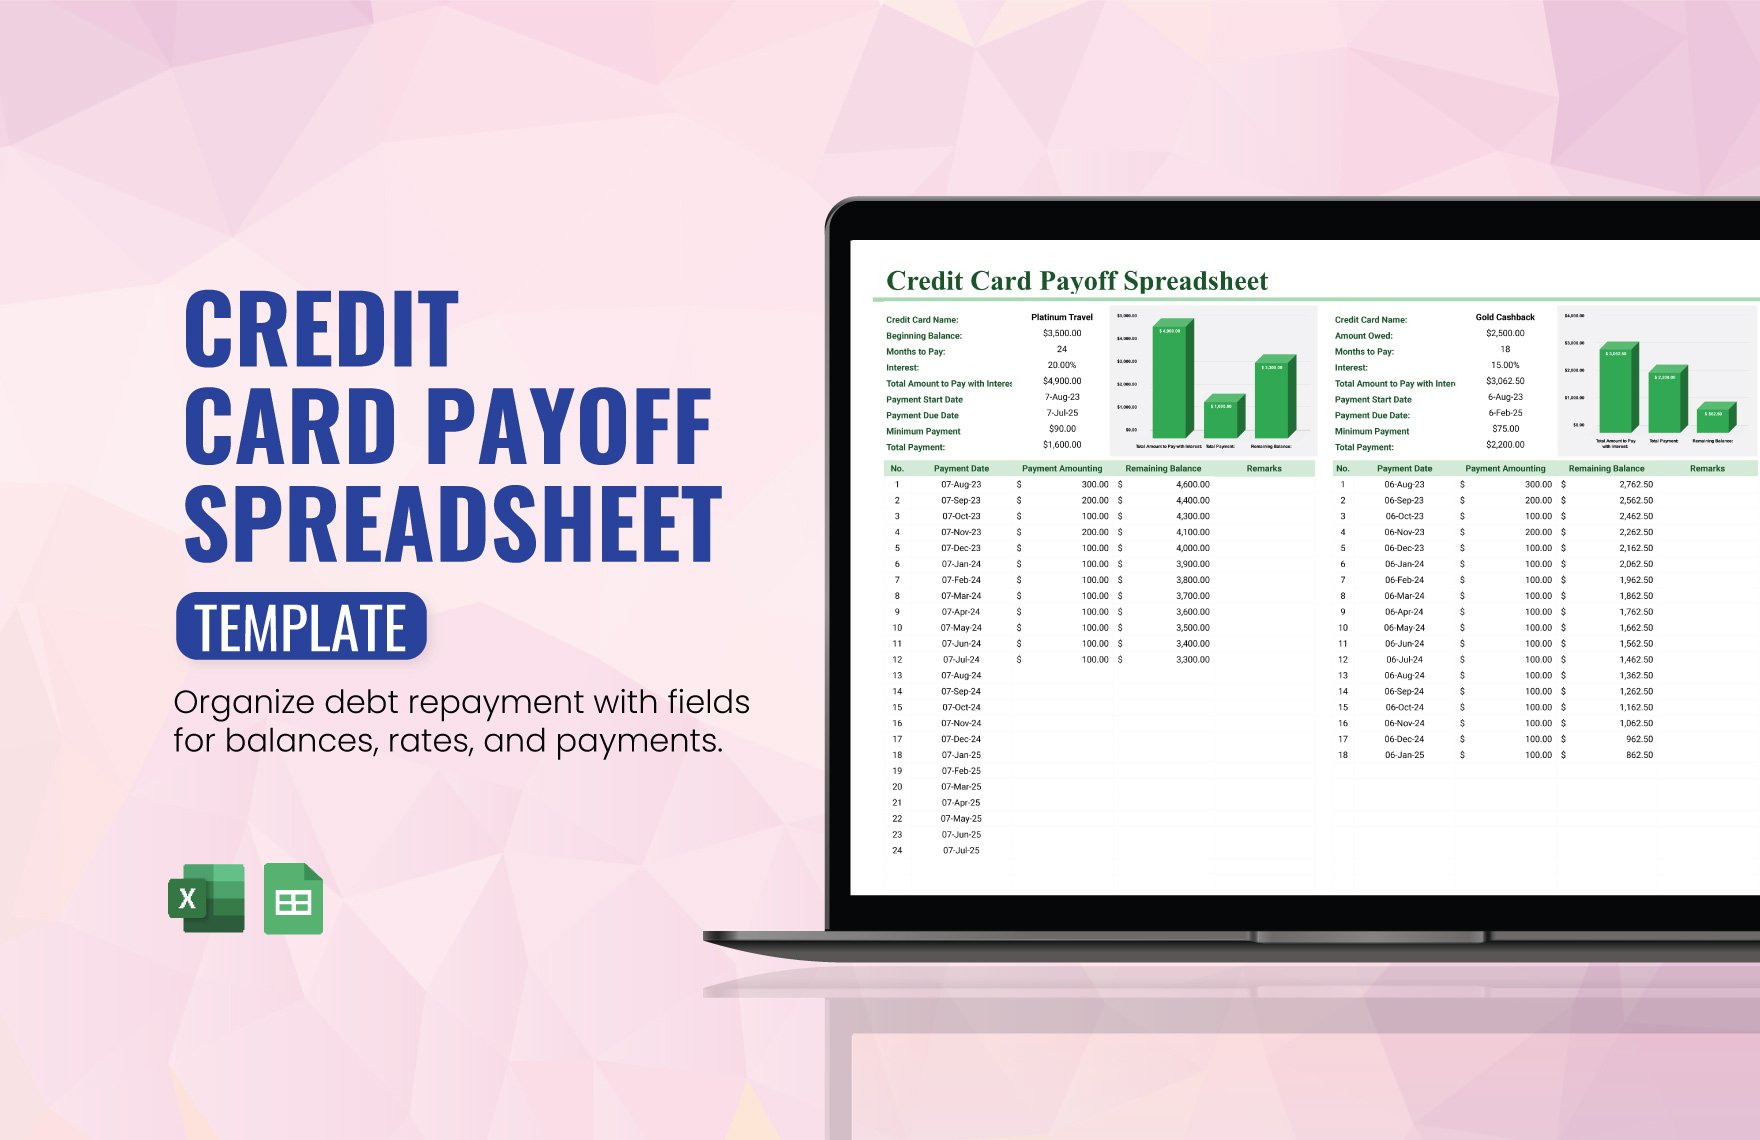 Credit Card Payoff Spreadsheet Template in Excel, Google Sheets